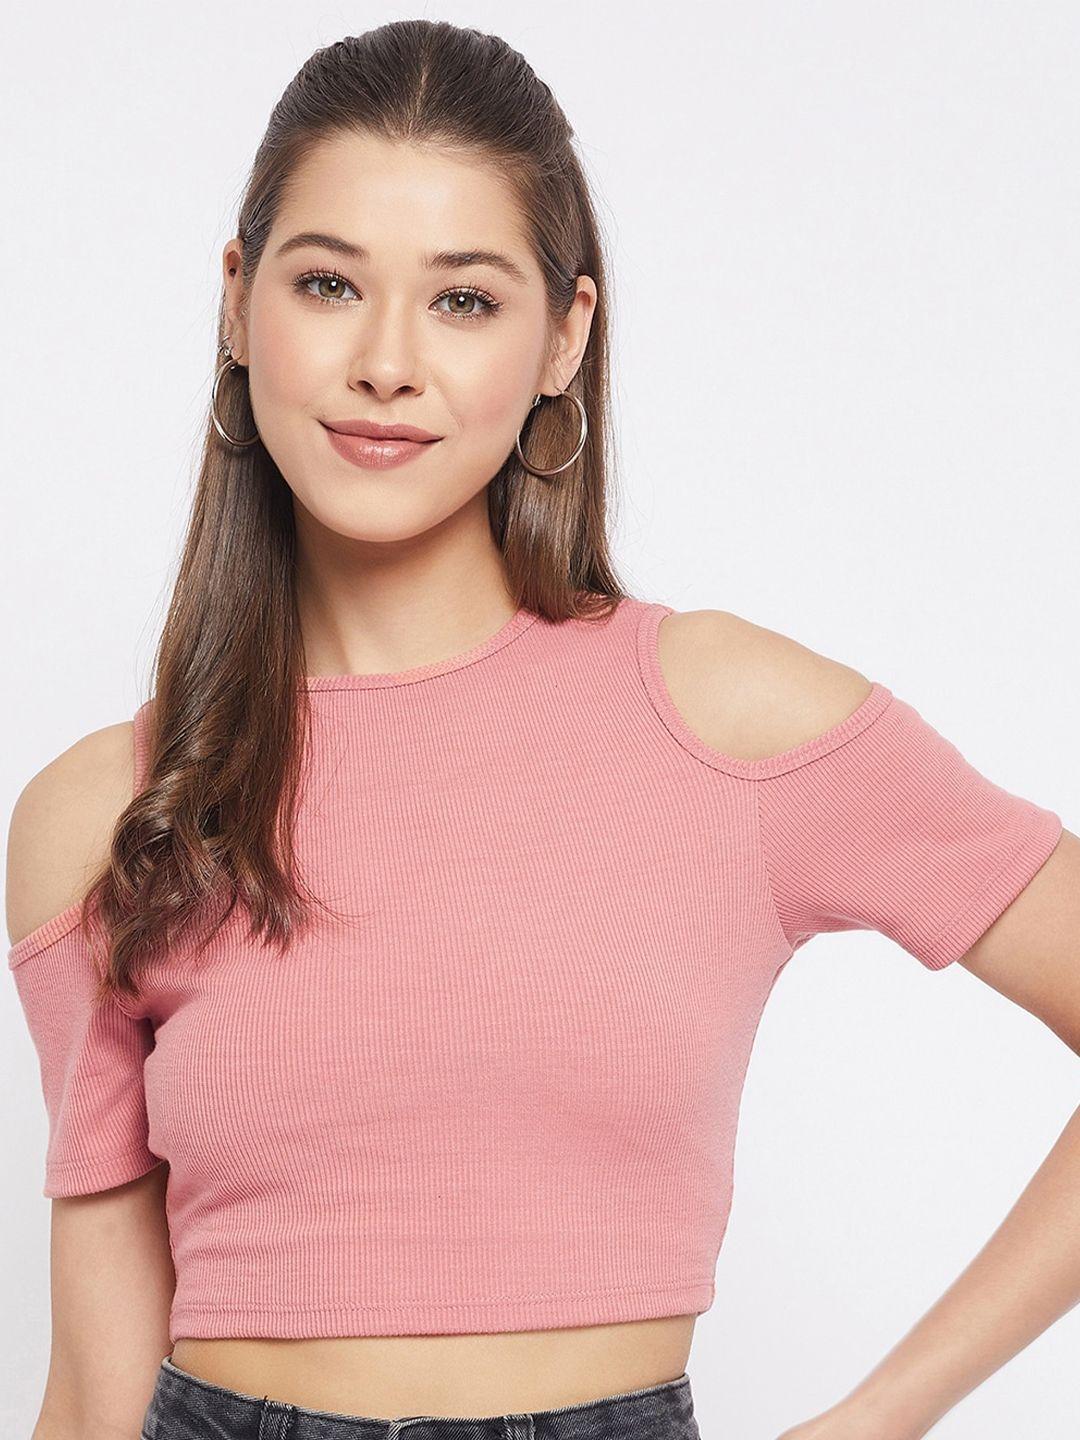 le-bourgeois-round-neck-cold-shoulder-crop-top